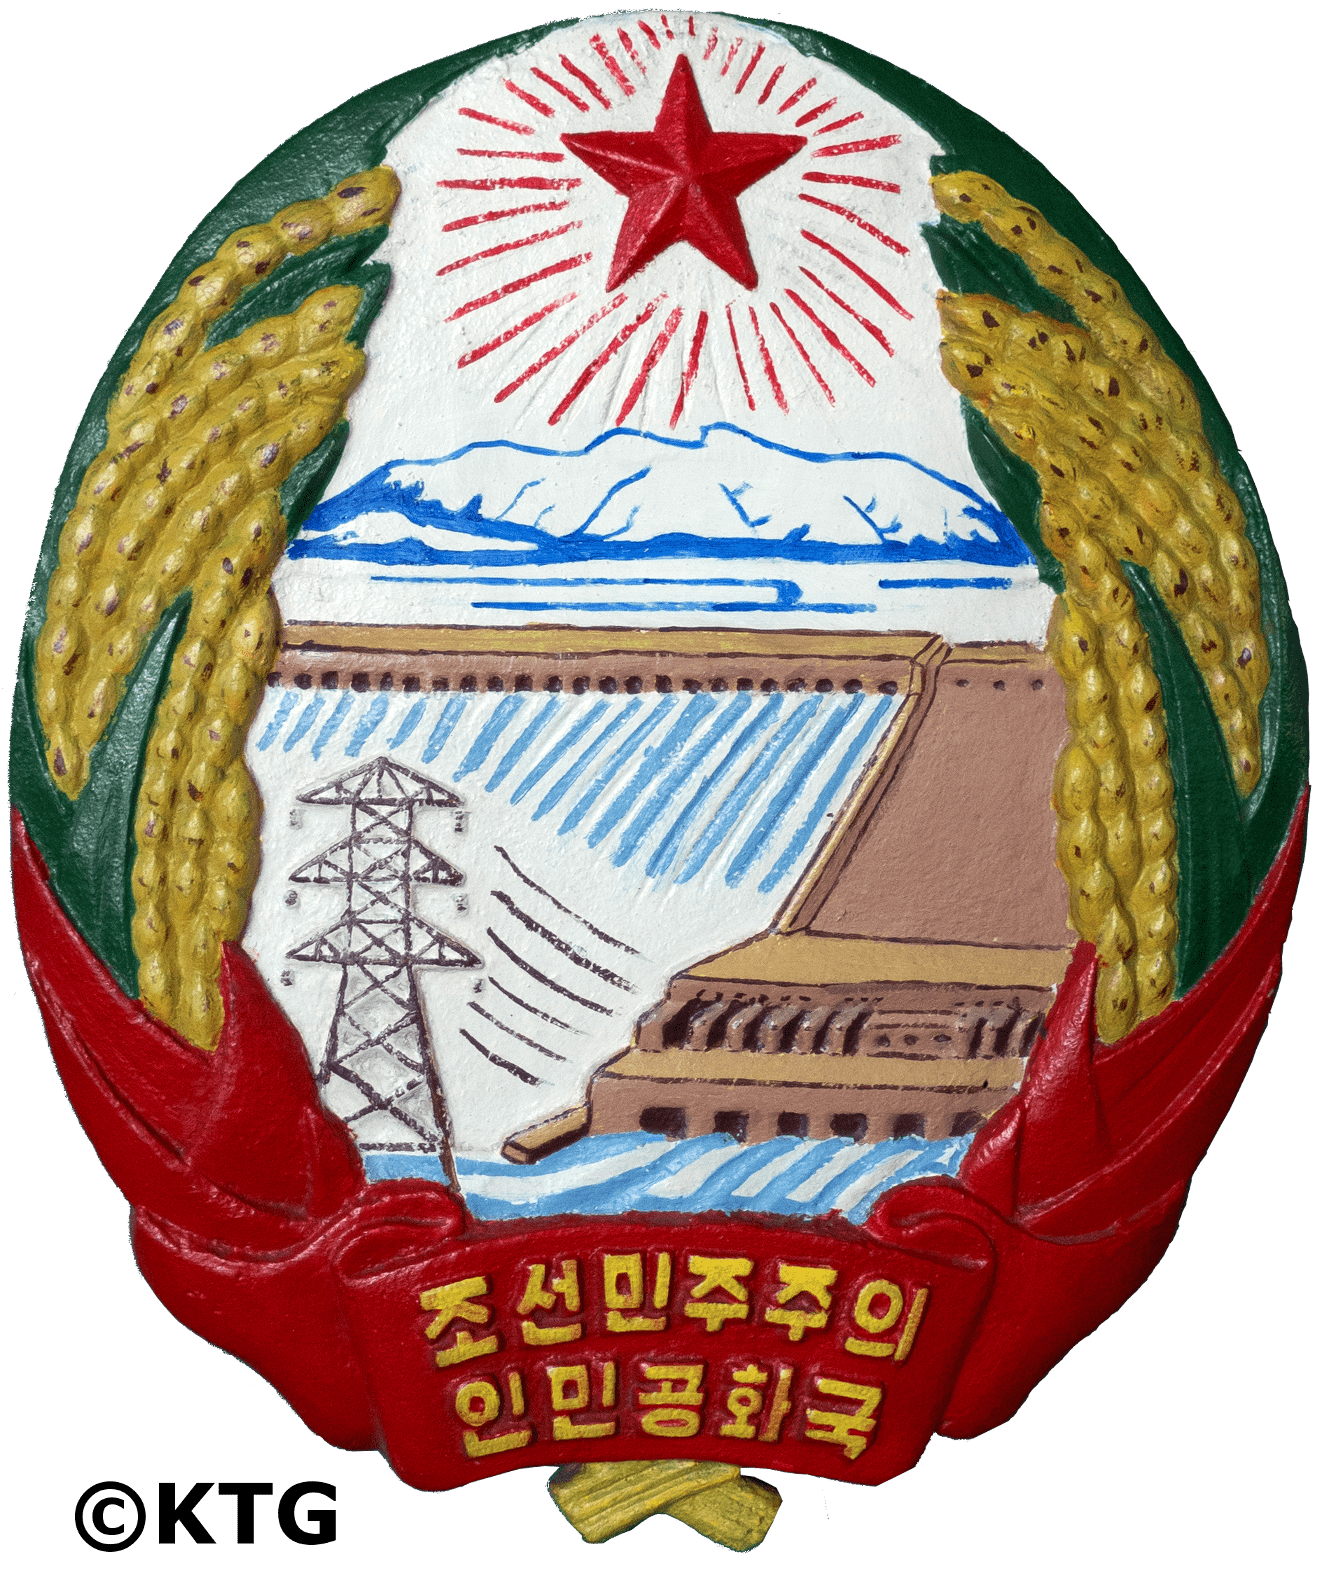 National Emblem of North Korea; the Democratic People's Republic of Korea (DPRK). Picture taken by KTG Tours